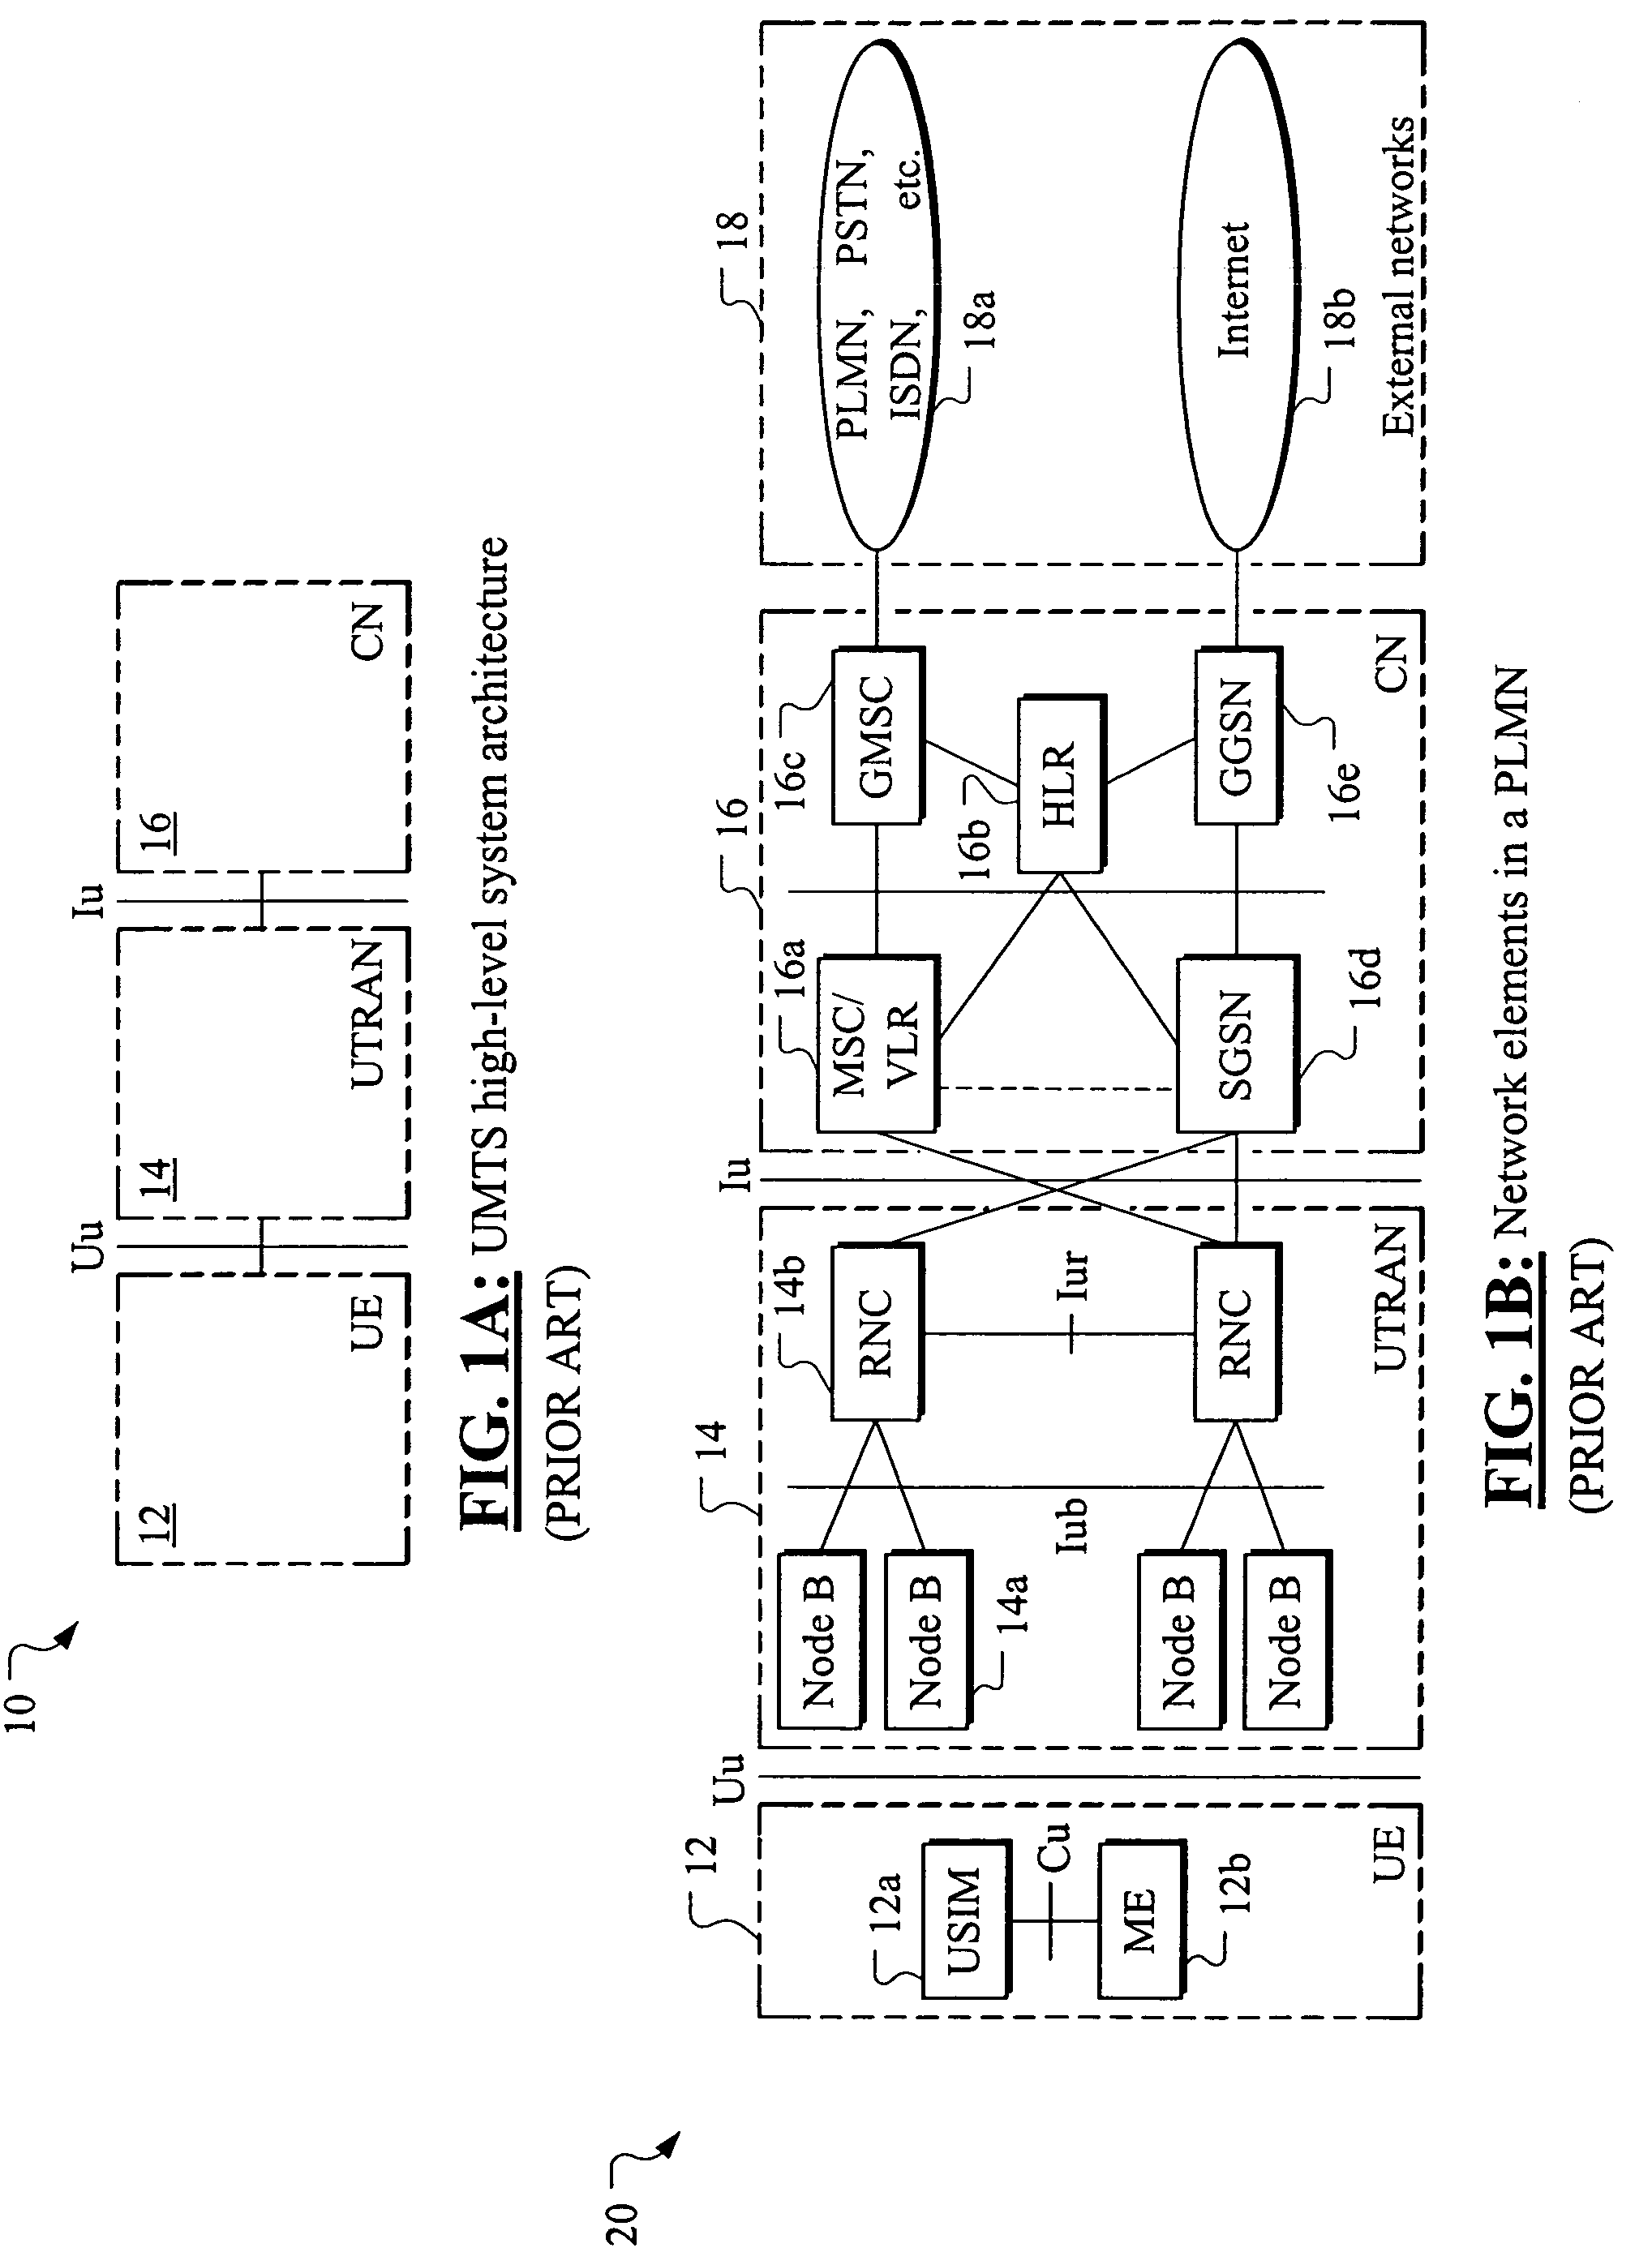 Method and apparatus for determining individual or common mobile subscriber number in mobile network for handling multiple subscribers having the same calling line identity